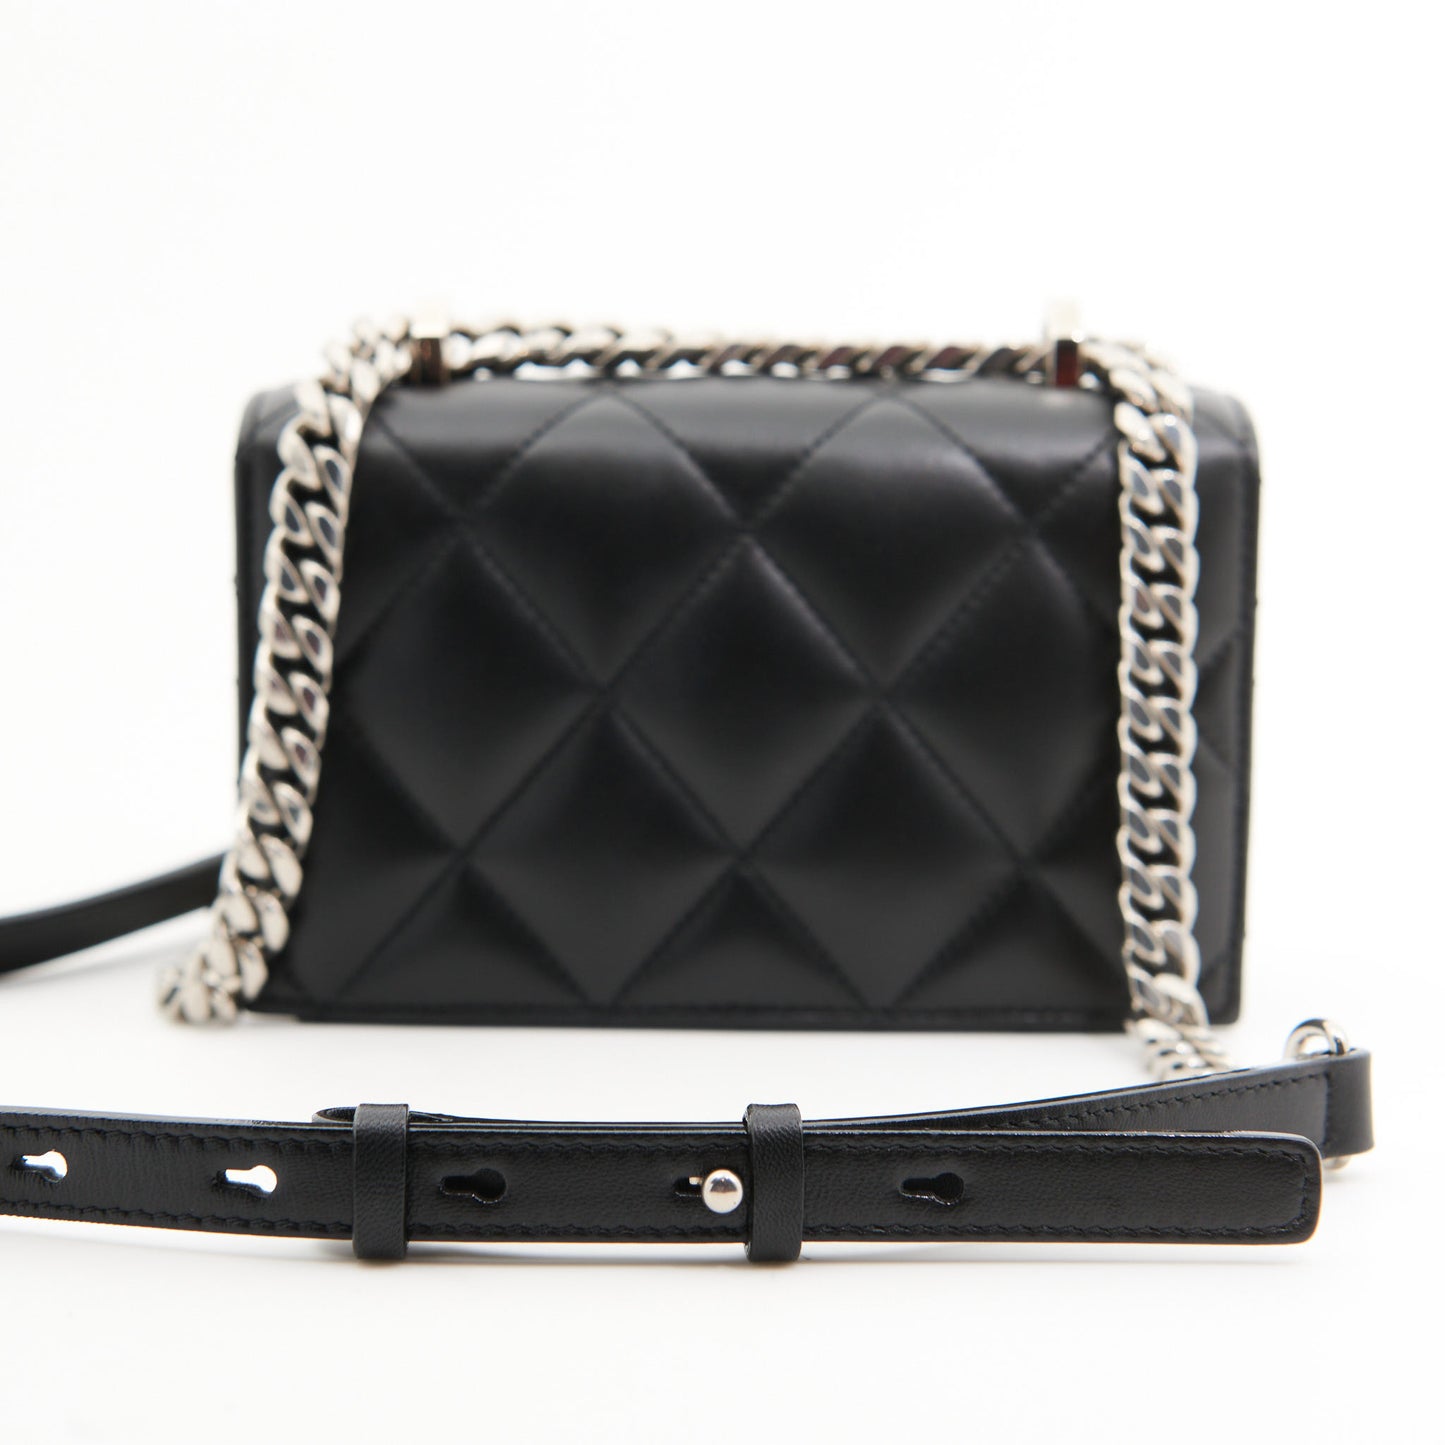 Alexander McQueen Calf Leather Jewelled The Knuckle Bag in Black